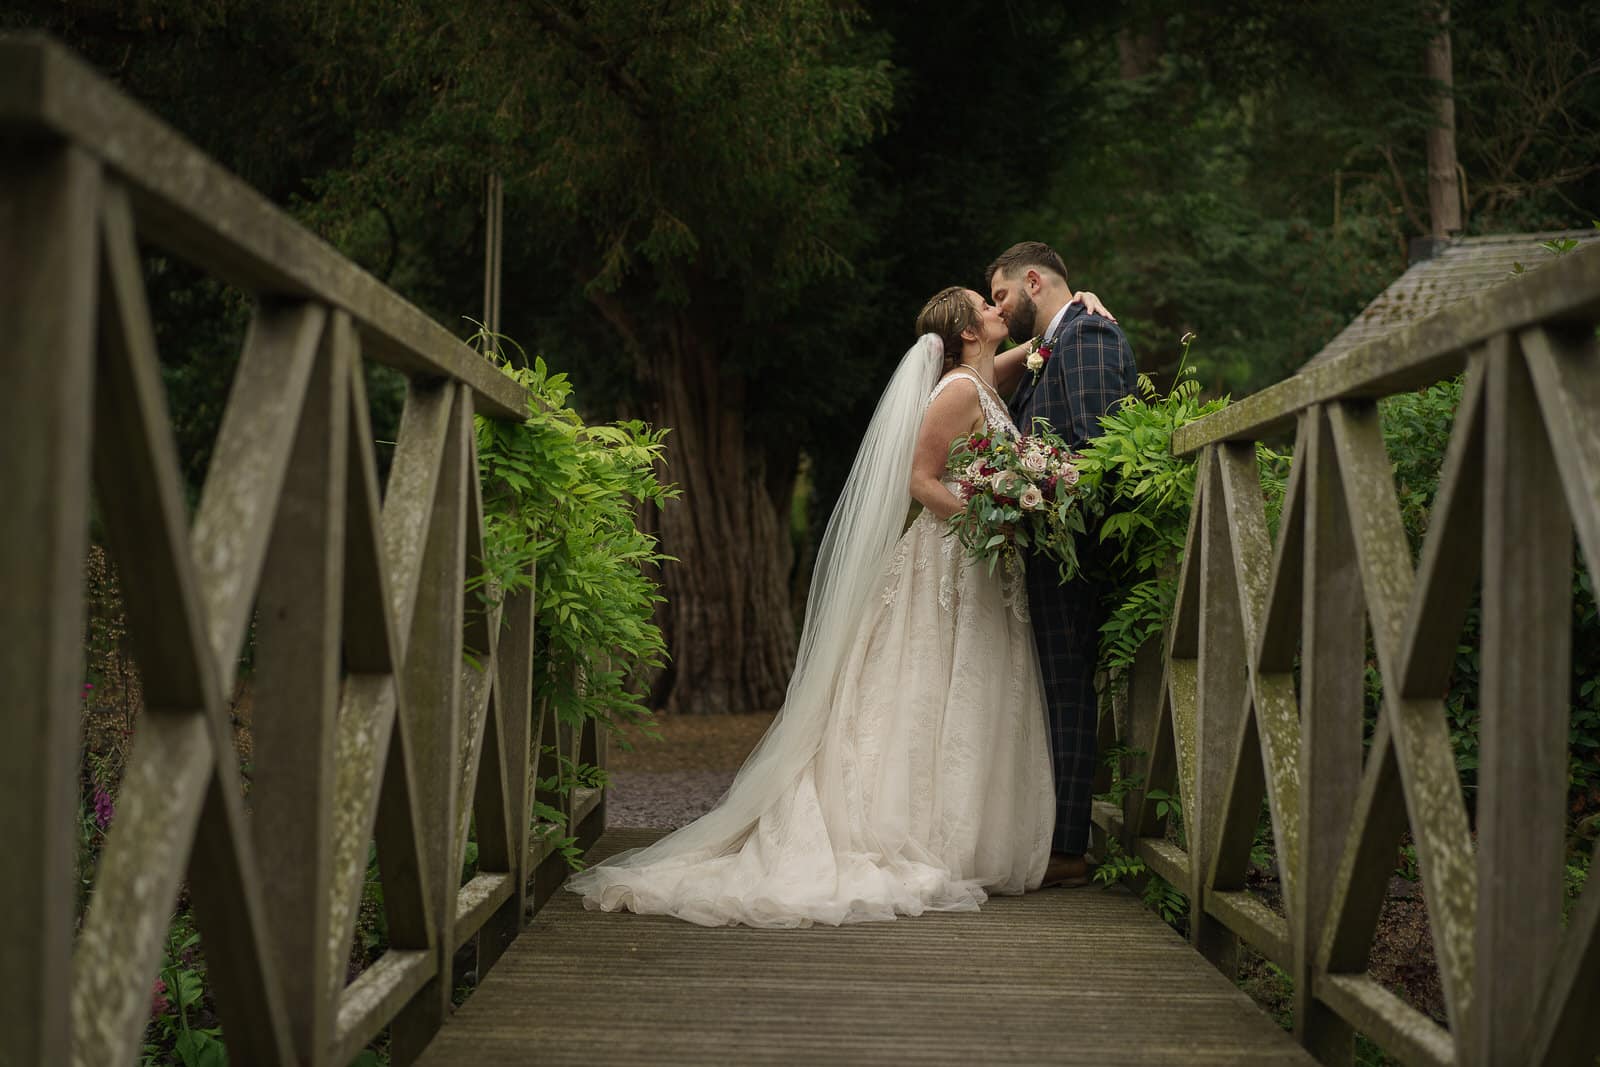 A bride and groom take some time out at the wonderful Tyn Dwr Hall in Llangollen, North Wales